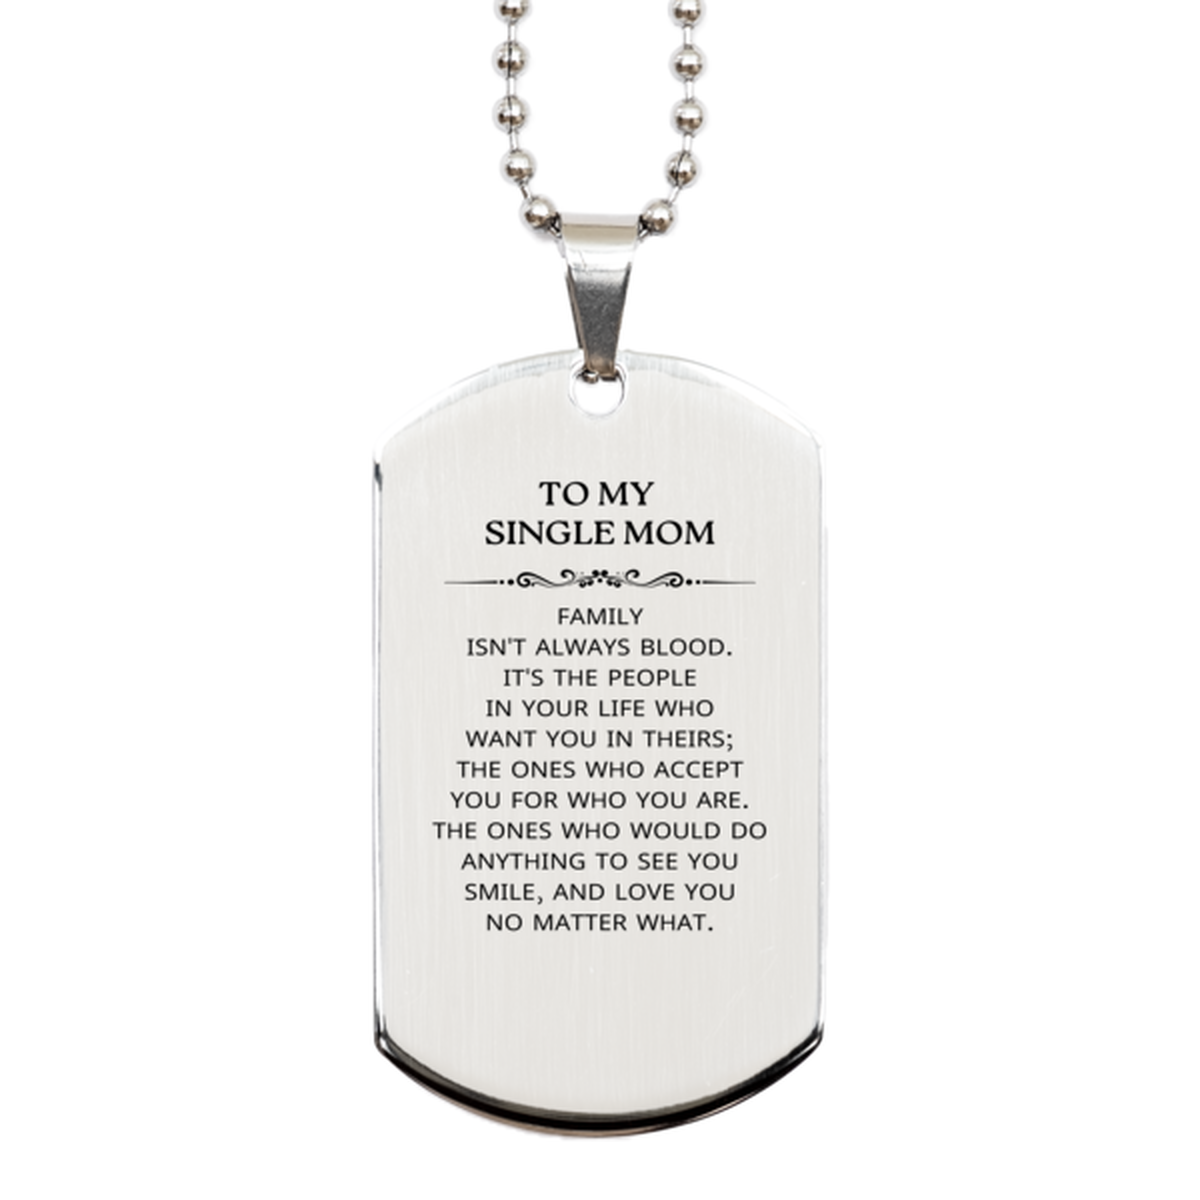 To My Single Mom Gifts, Family isn't always blood, Single Mom Silver Dog Tag, Birthday Christmas Unique Present For Single Mom